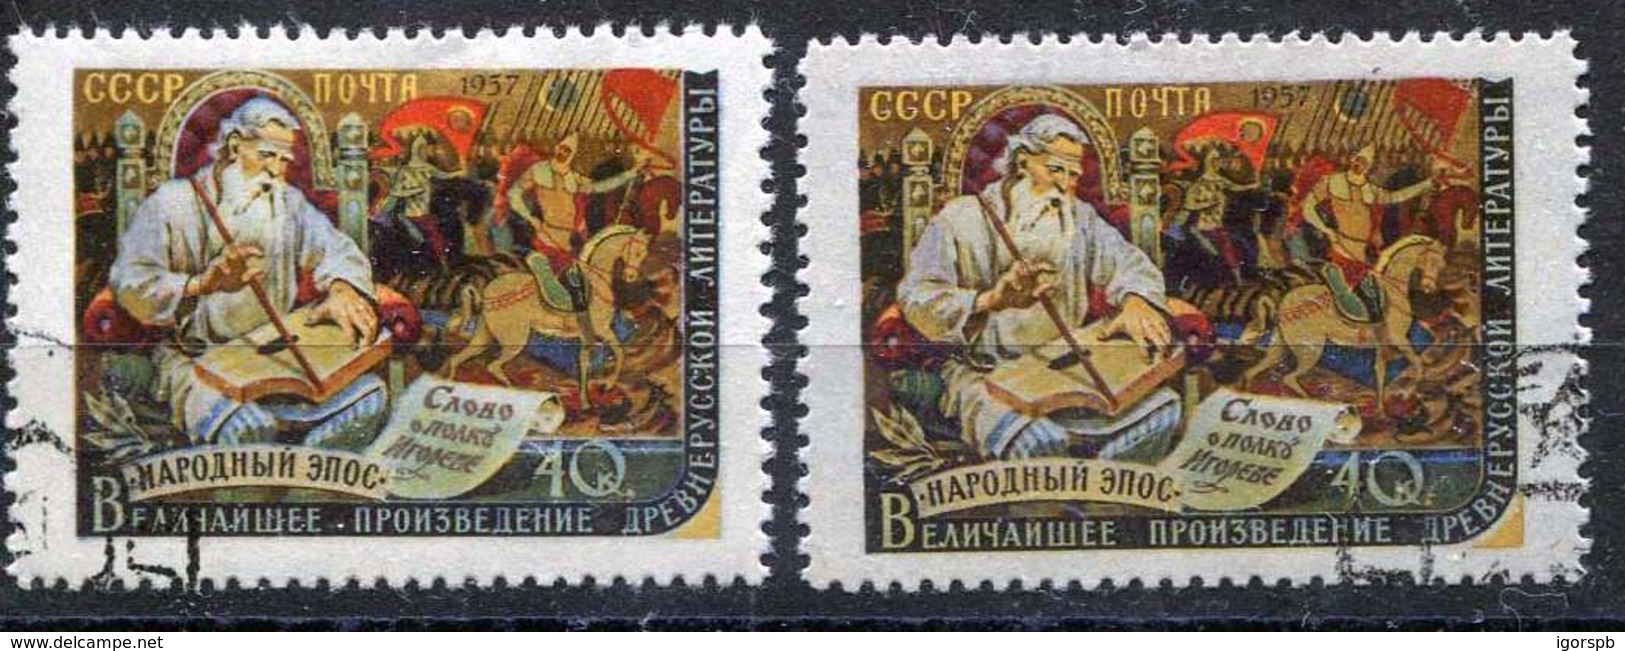 Russia , SG 2076 ,SG 2076a ;1957,"The Tale Of The Host Of Igor",single,cancelled - Used Stamps